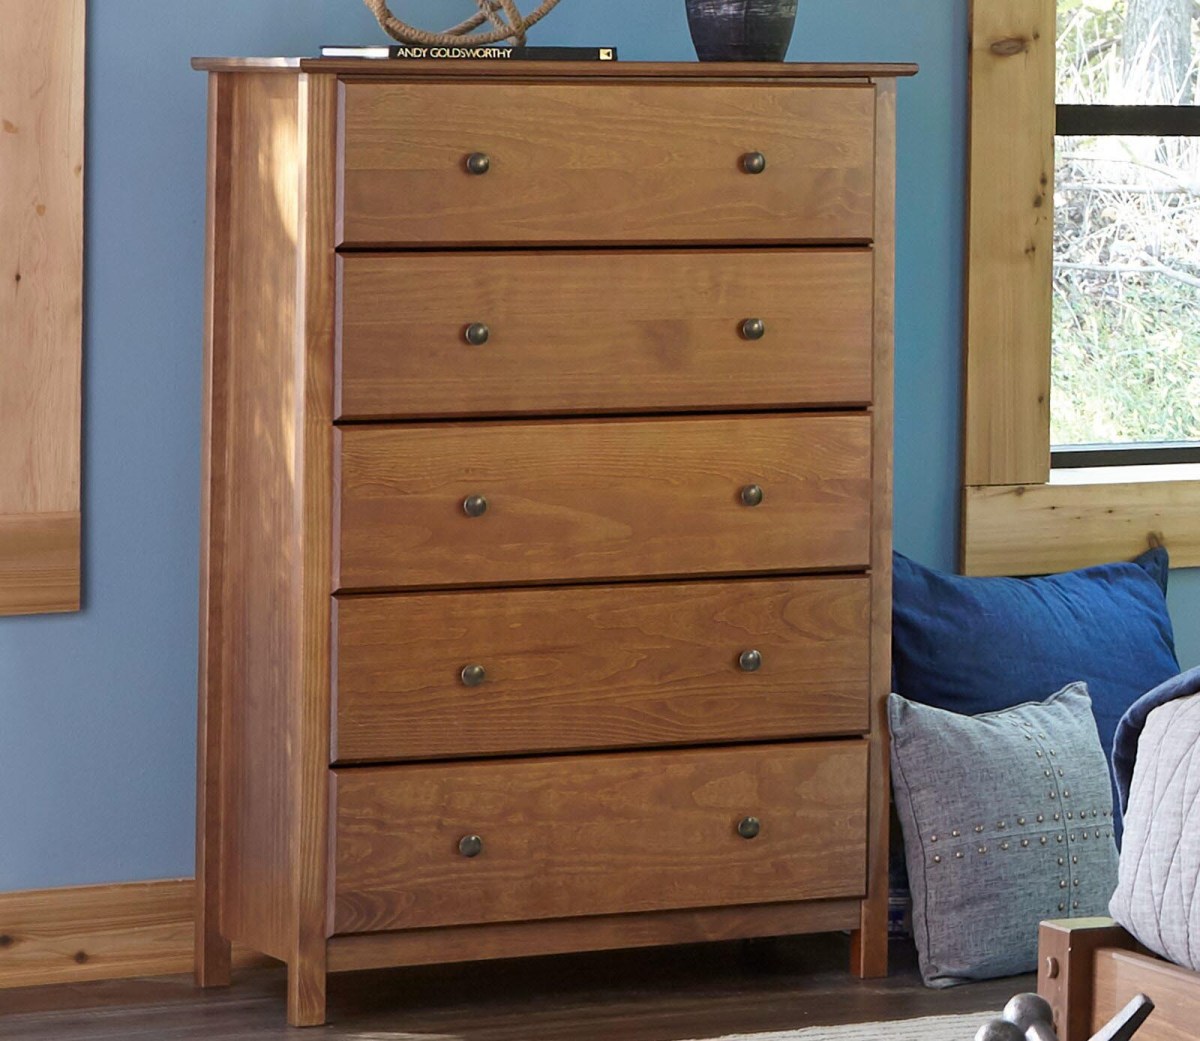 Things You Need for an Apartment Option Drawer Dresser